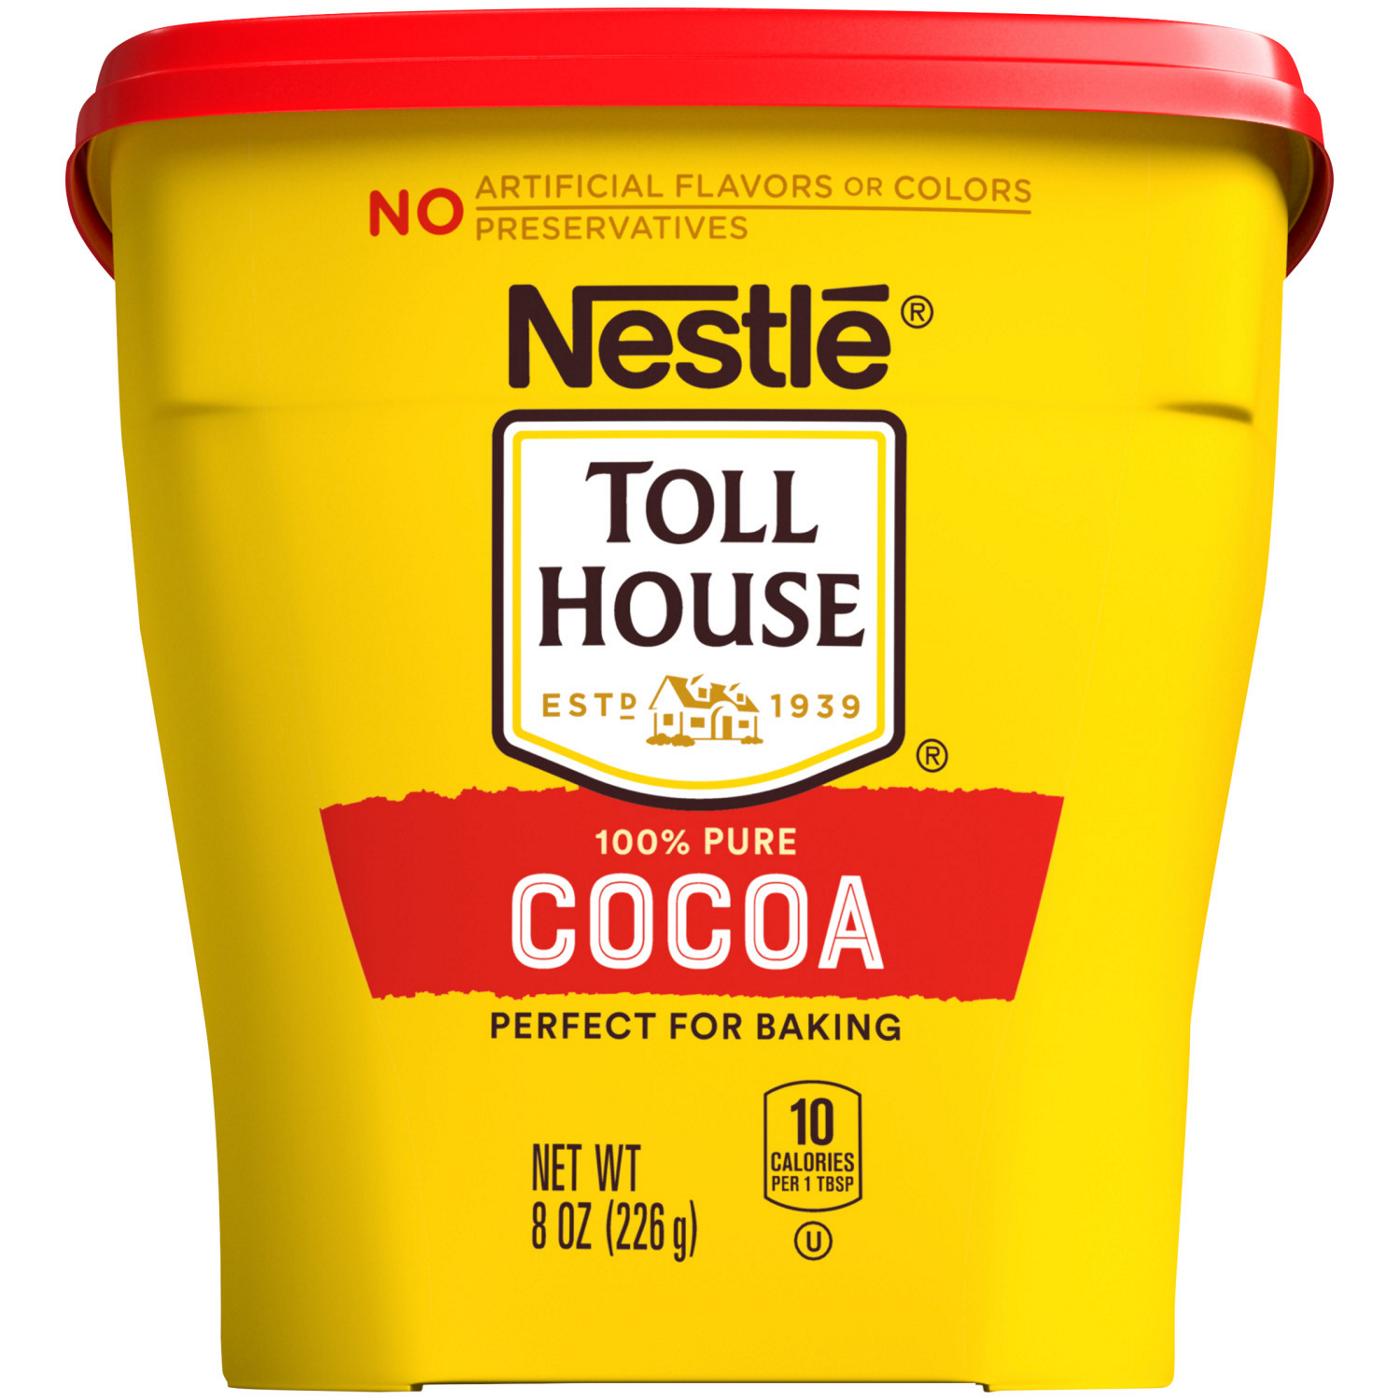 Nestle Toll House Cocoa; image 1 of 5